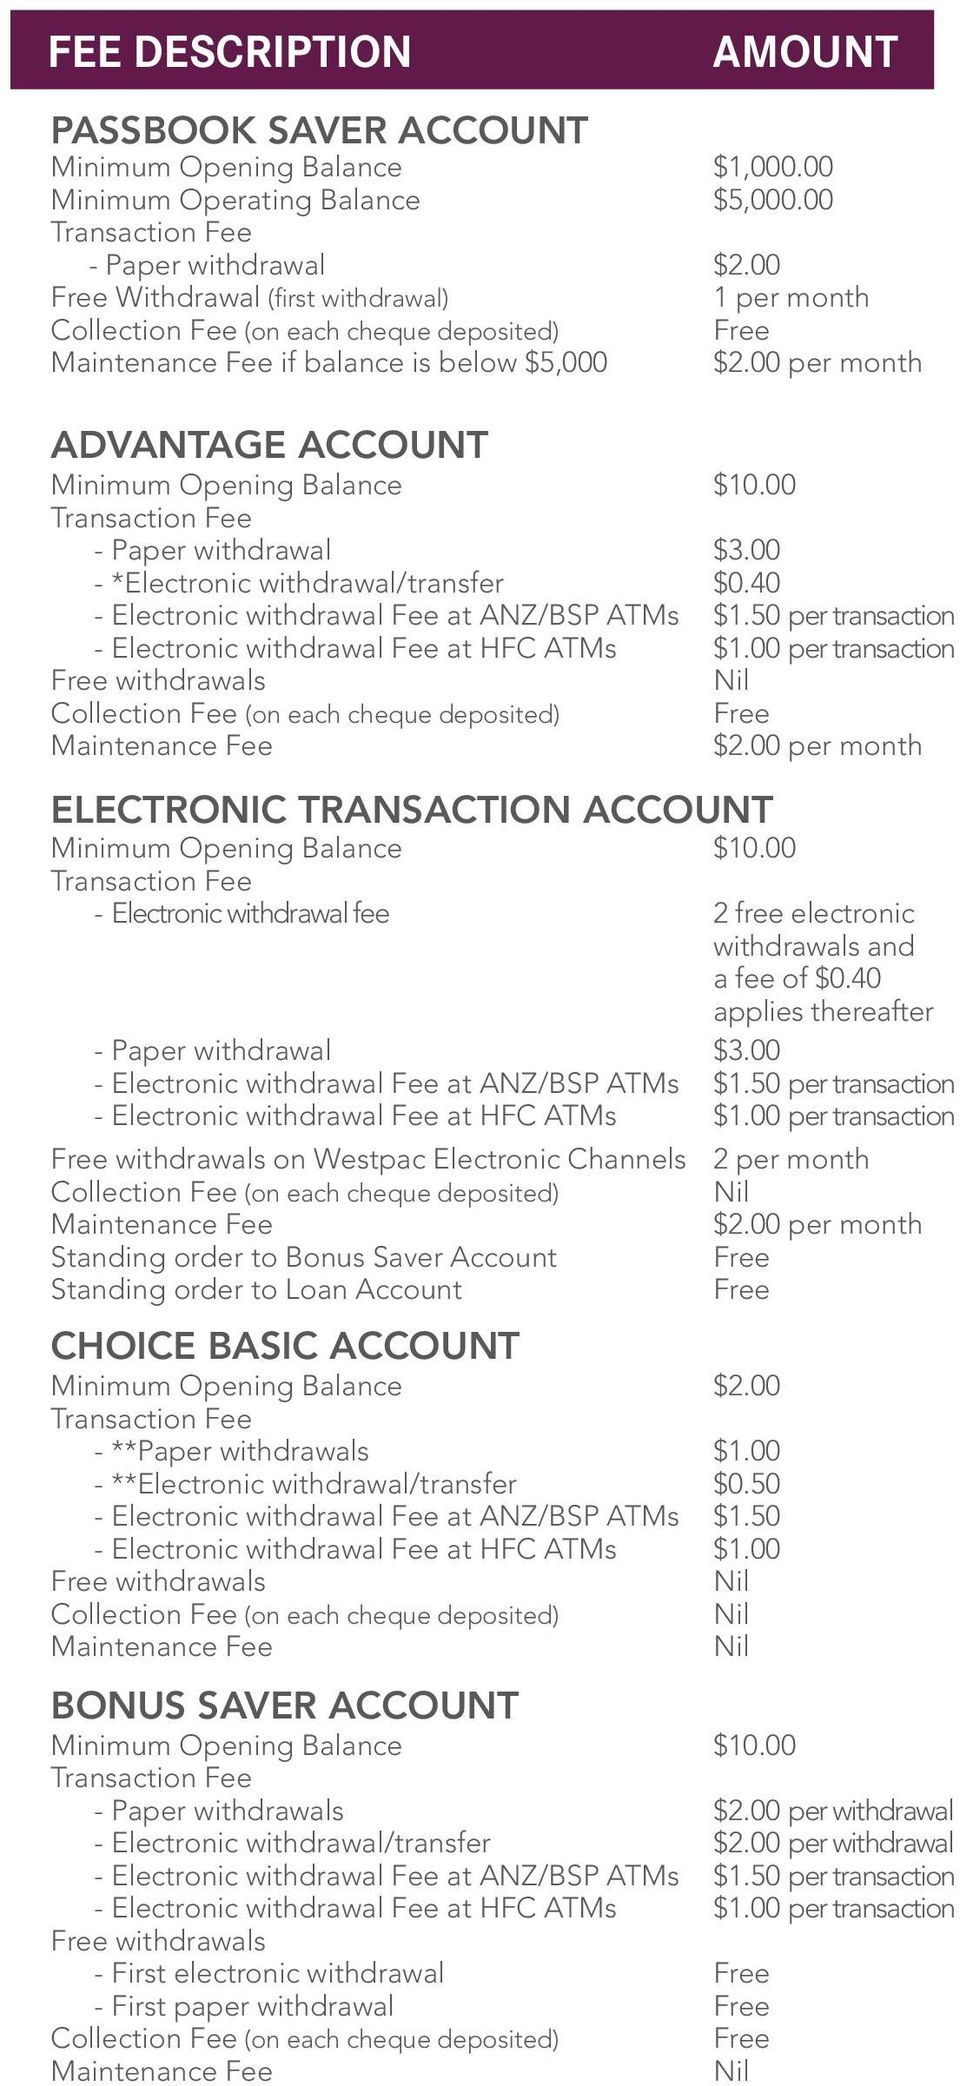 00 per withdrawals $2.00 per month ELECTRONIC TRANSACTION ACCOUNT - Electronic withdrawal fee 2 free electronic withdrawals and a fee of $0.40 applies thereafter - Paper withdrawal $3.